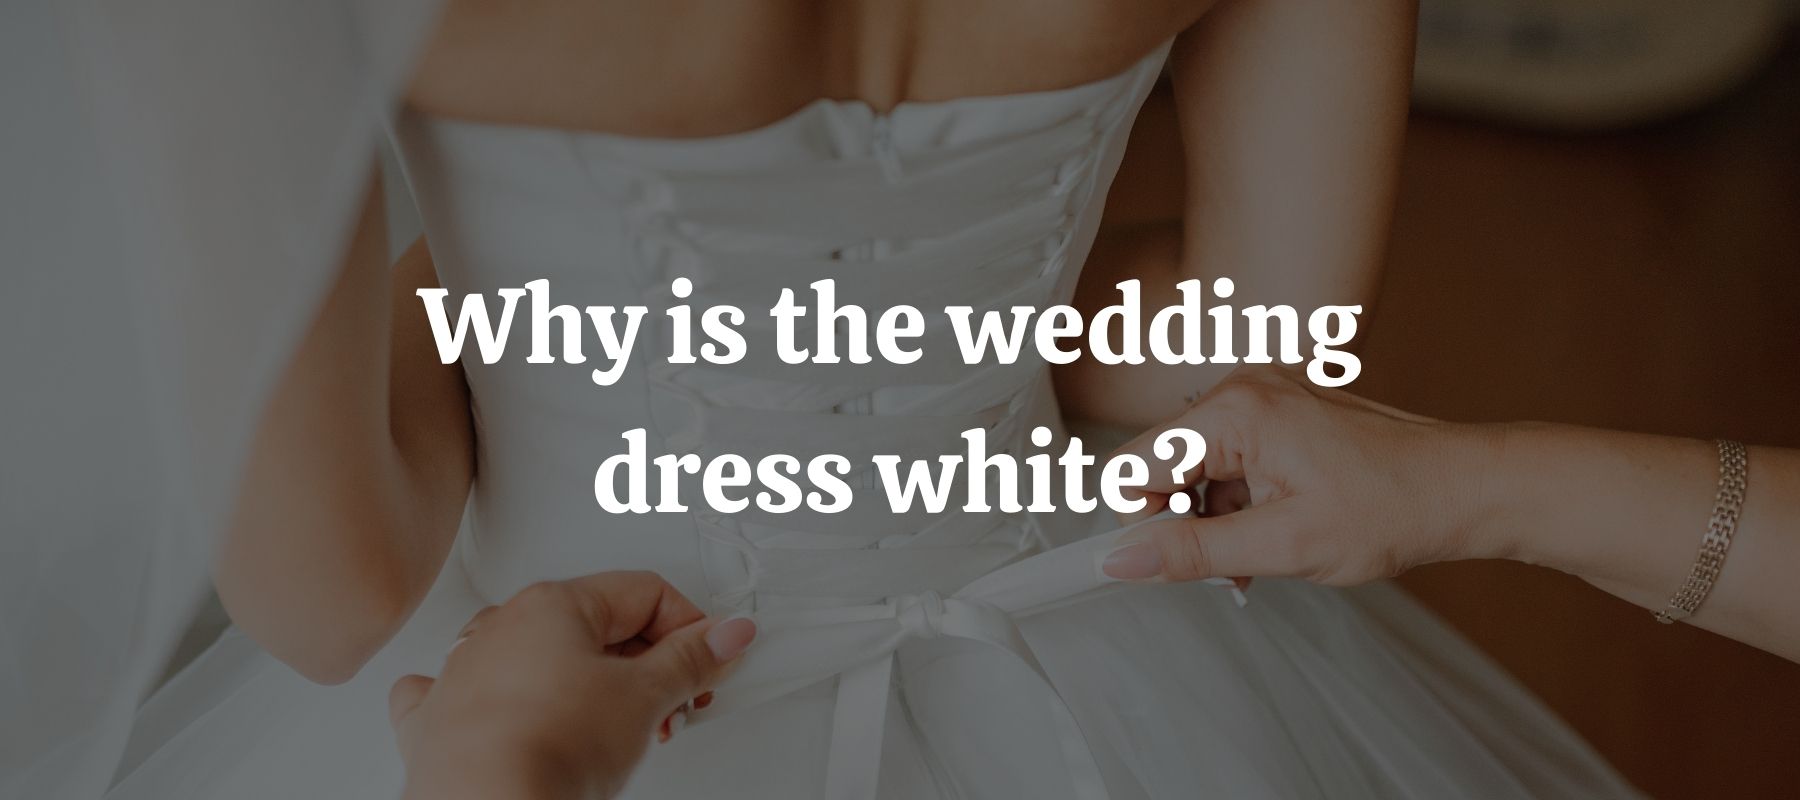 Why is the wedding dress white